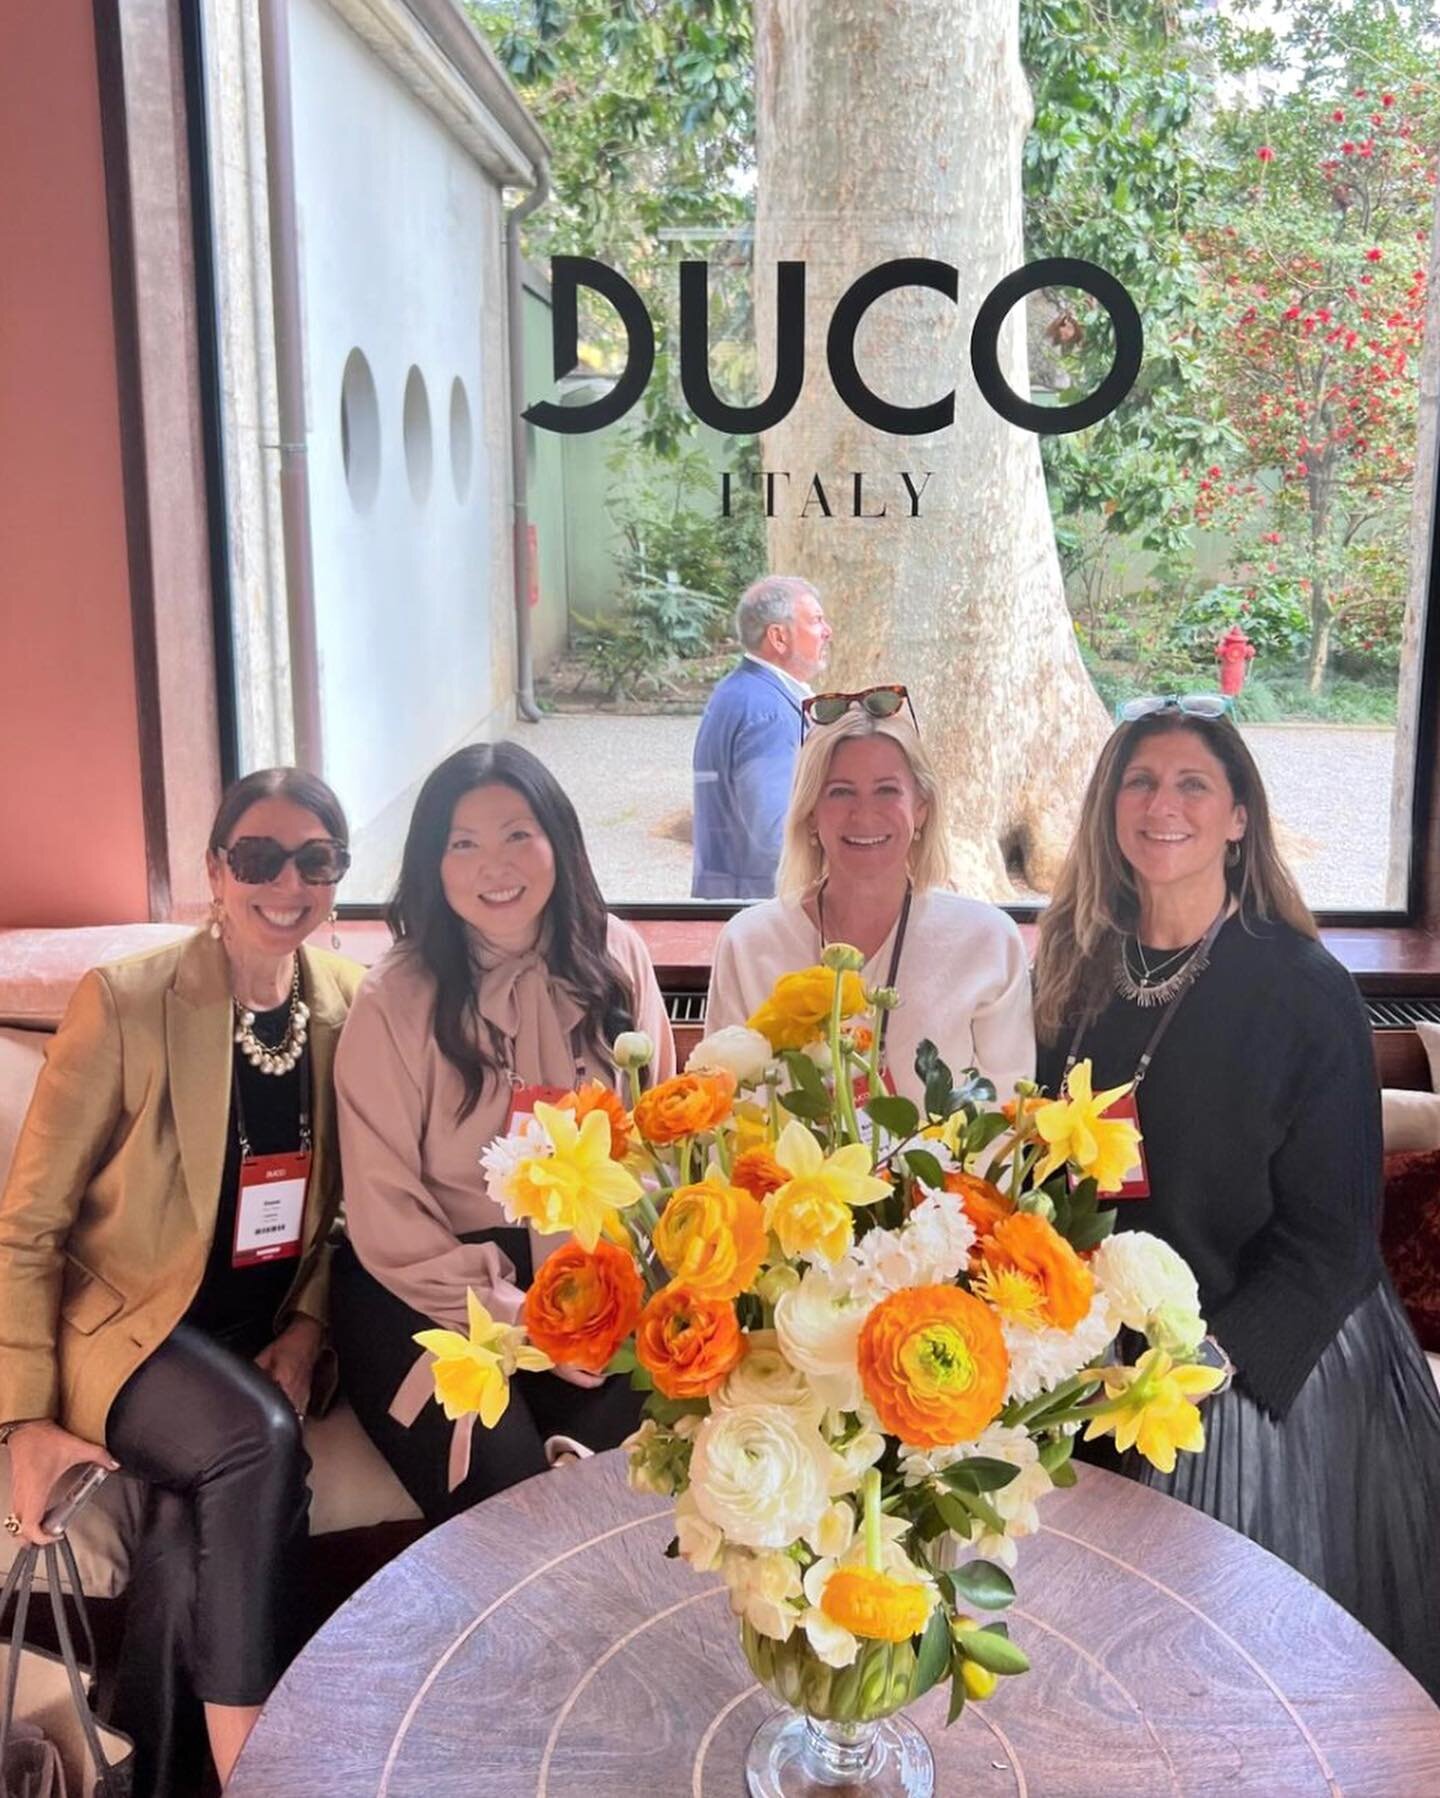 We&rsquo;ve just returned from Milan for @ducoitaly, an invitation-only showcase of high-end travel across Italy 🇮🇹 
 
Set against the most incredible backdrops, we engaged with Italy&rsquo;s top hoteliers, experience providers, and destination tea